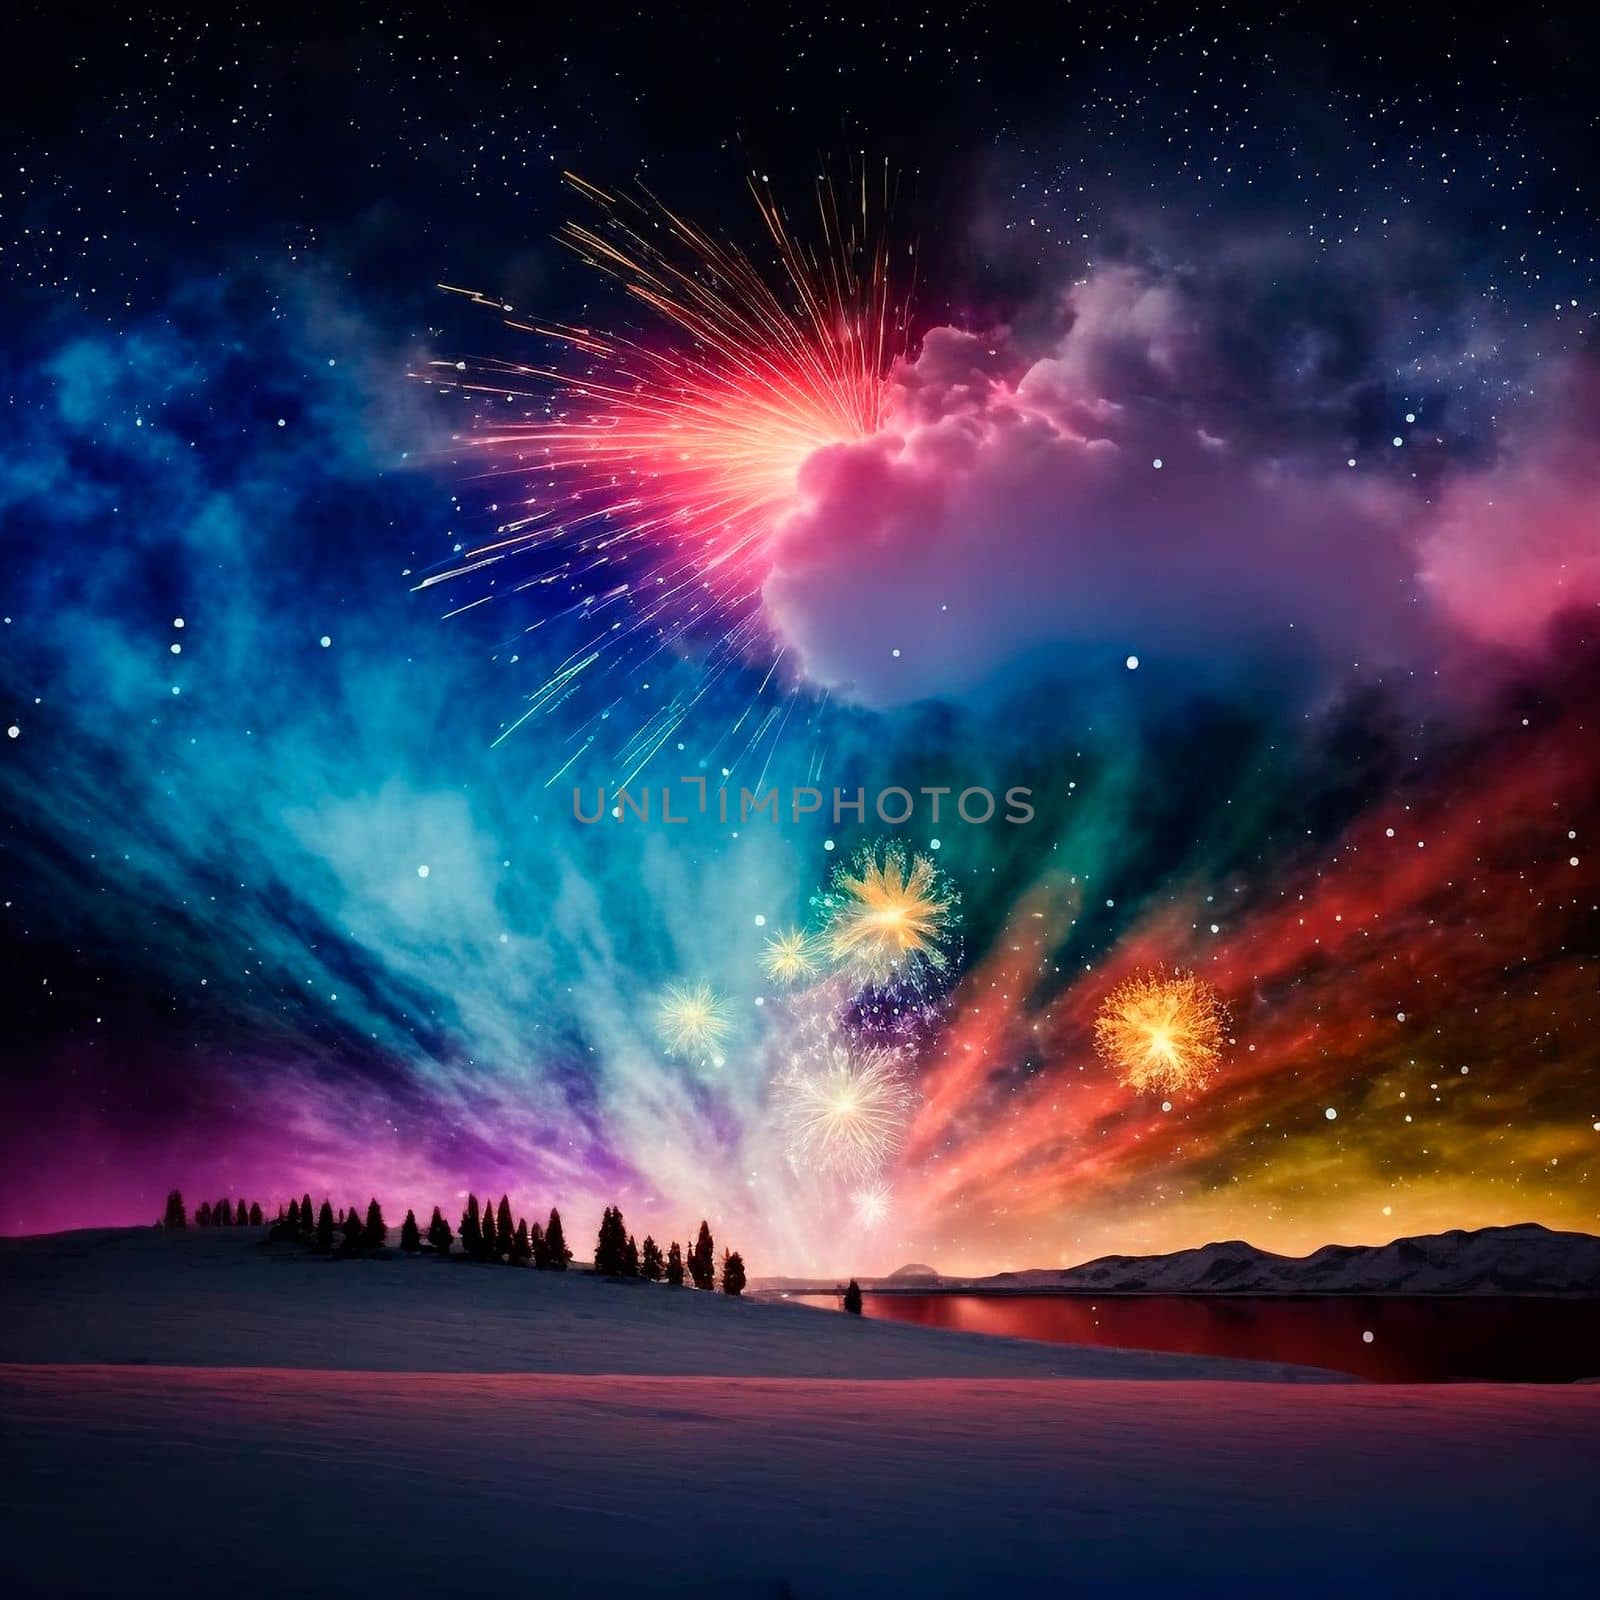 Bright night sky with fireworks. High quality illustration